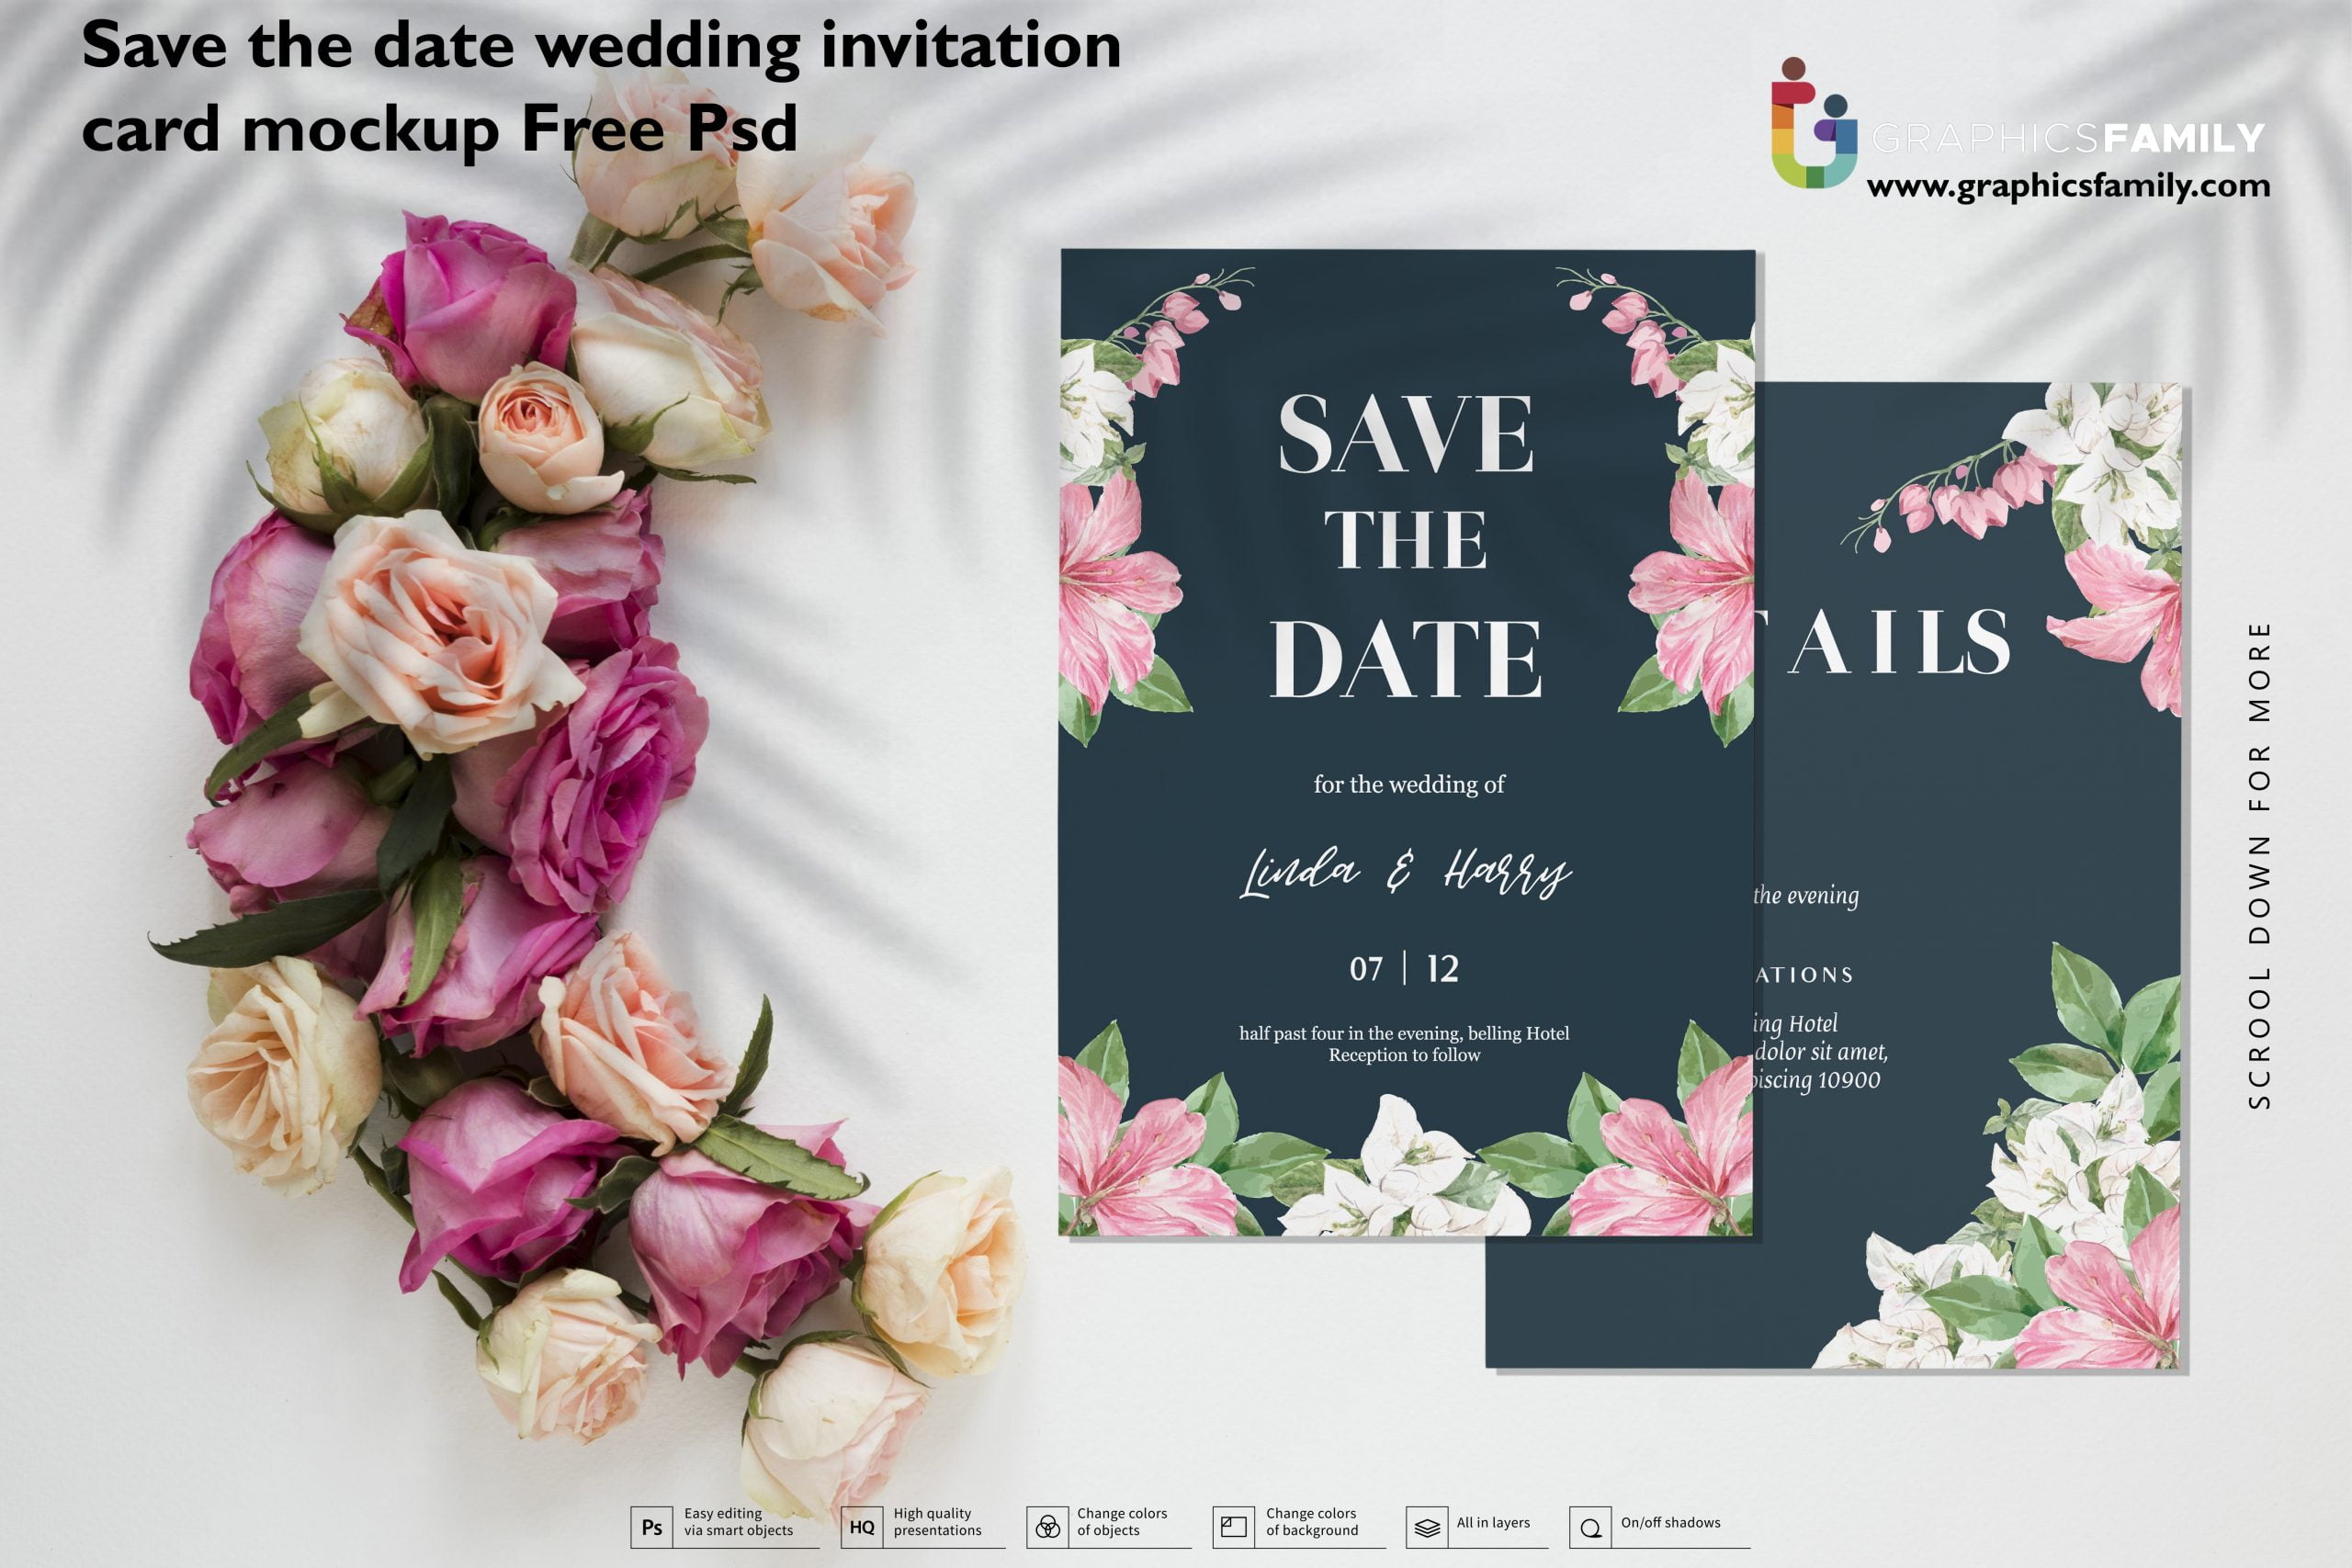 Download Save The Date Wedding Invitation Card Mockup Free Psd Graphicsfamily